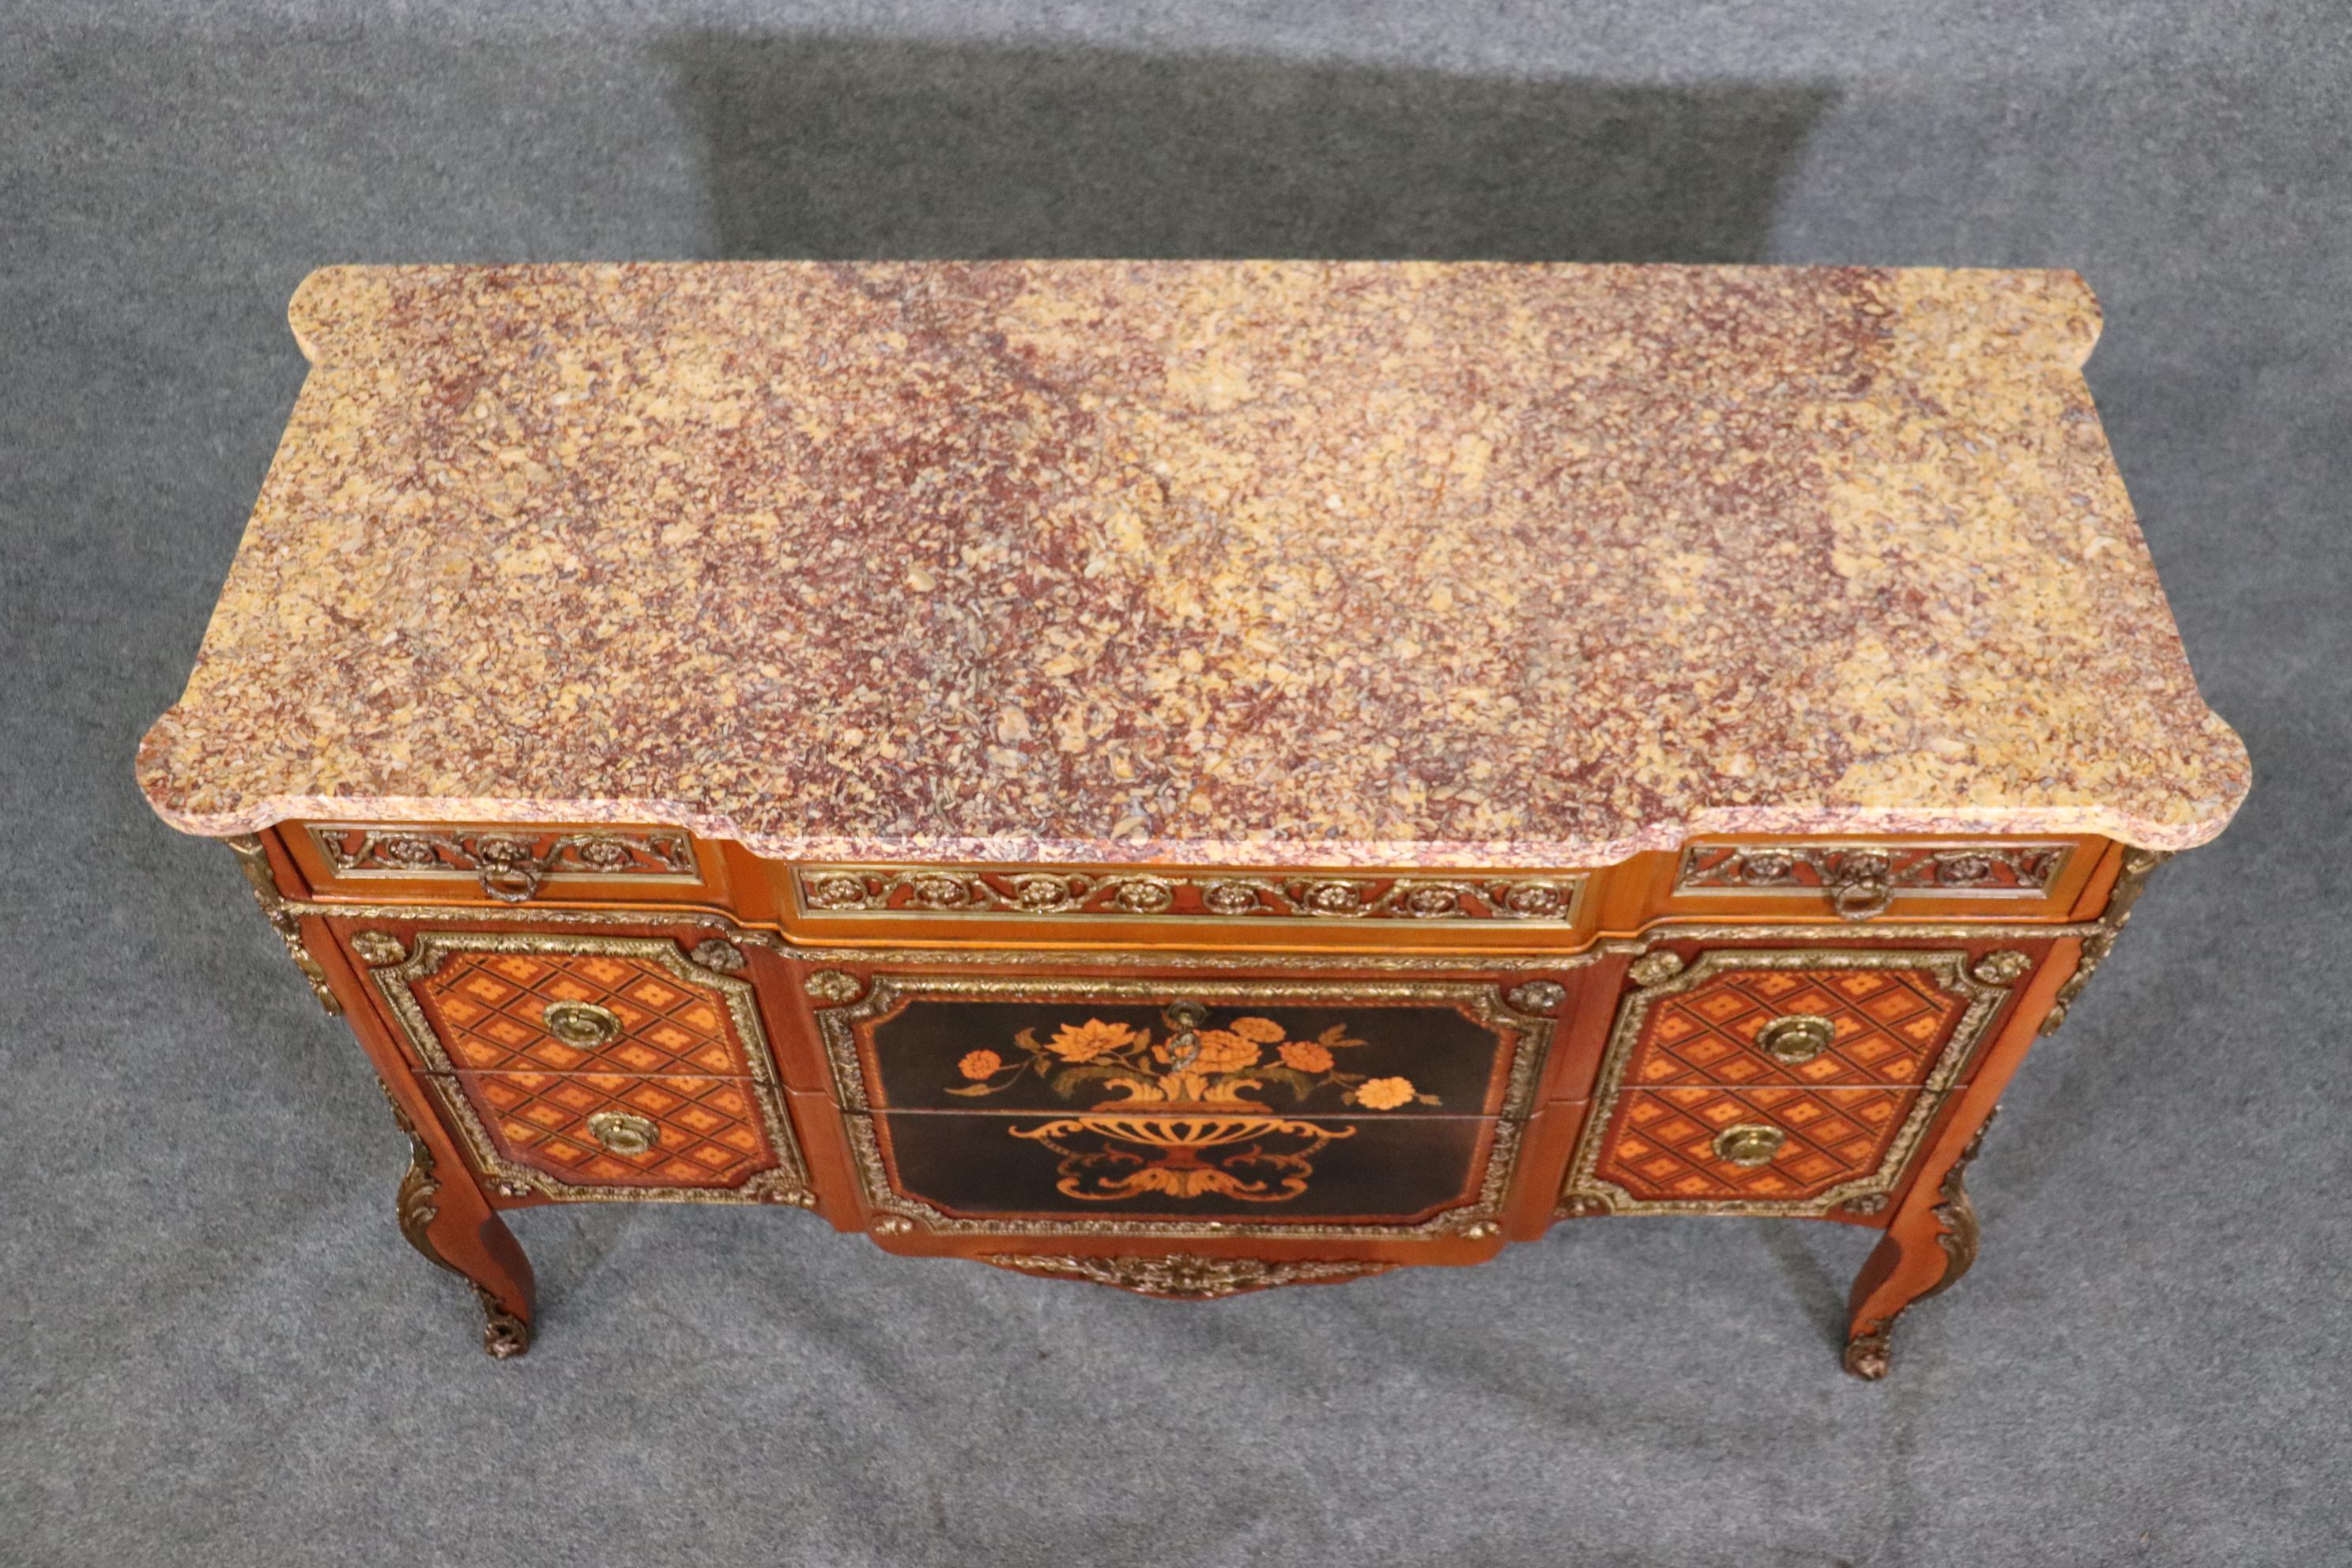 This is a truly gorgeous marble top inlaid marquetry commode made in France during the 1940s era and has a wonderful slab of purple lace marble and incredible intracate inlay and bronze. The commode is in good condition with minor signs of age and